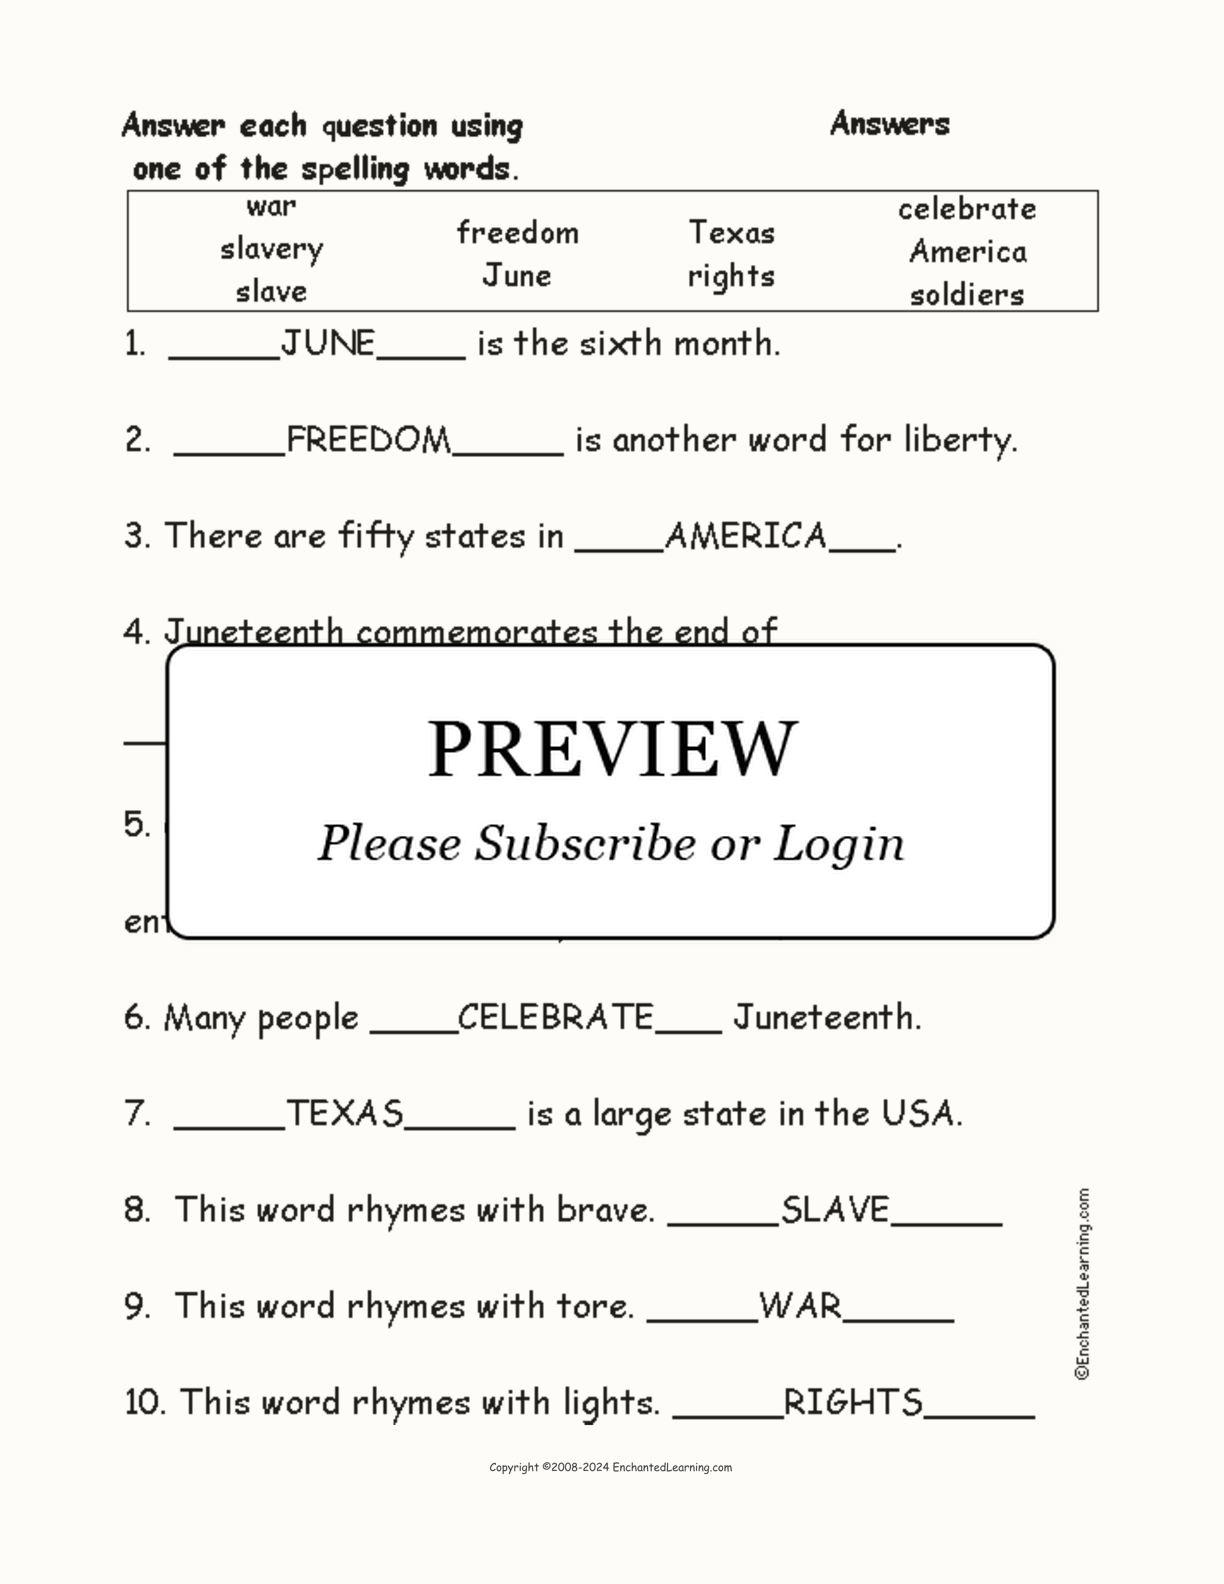 Juneteenth Spelling Word Questions interactive worksheet page 2